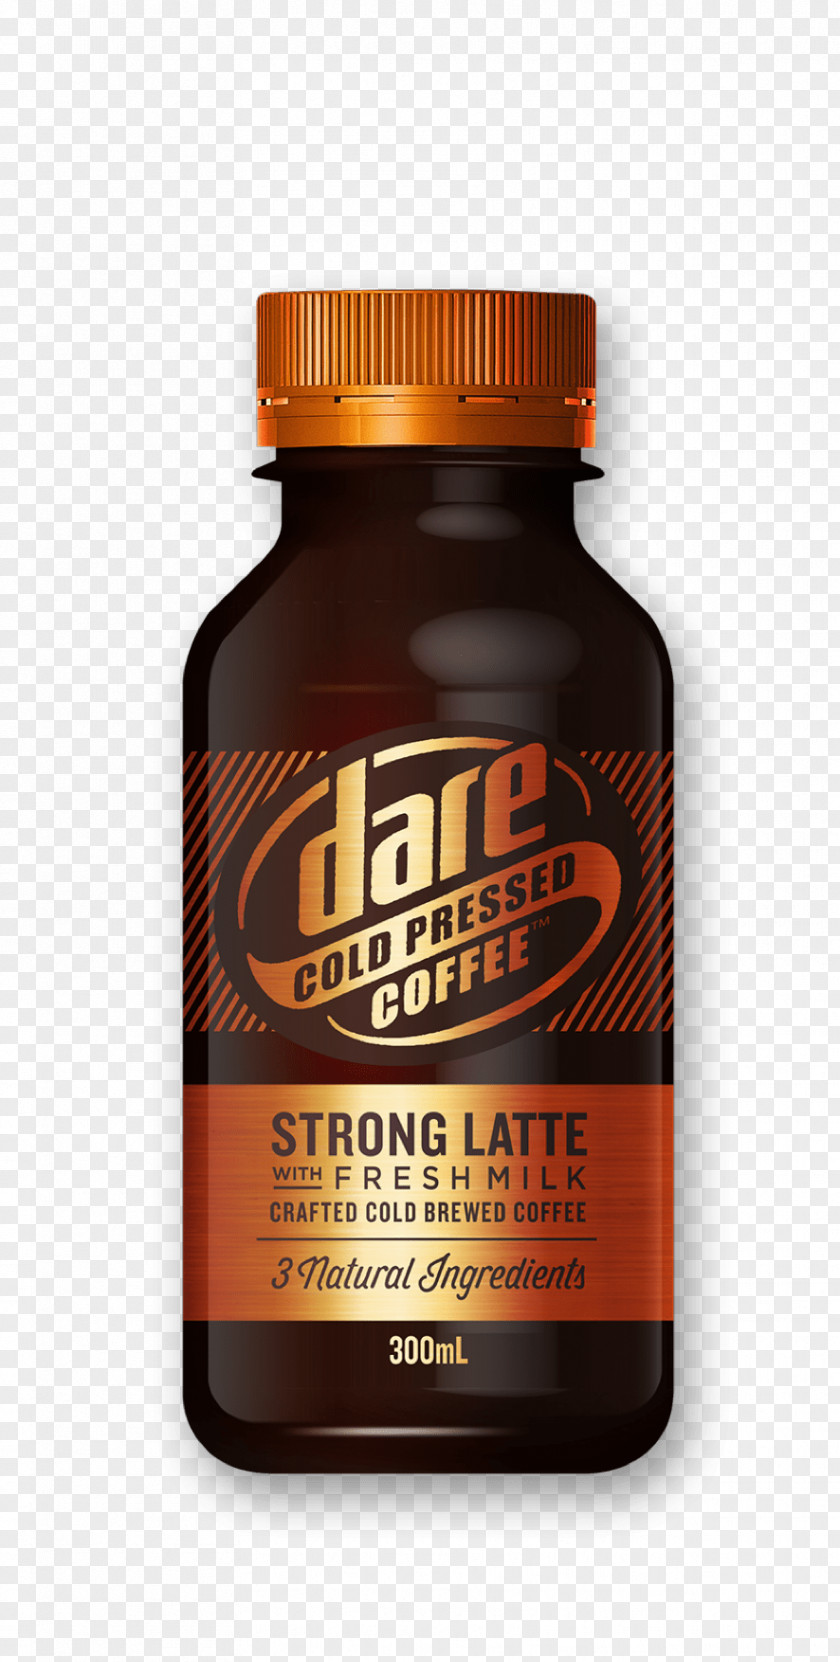 ICED LATTE Iced Coffee Latte Cold Brew Caffè Mocha PNG